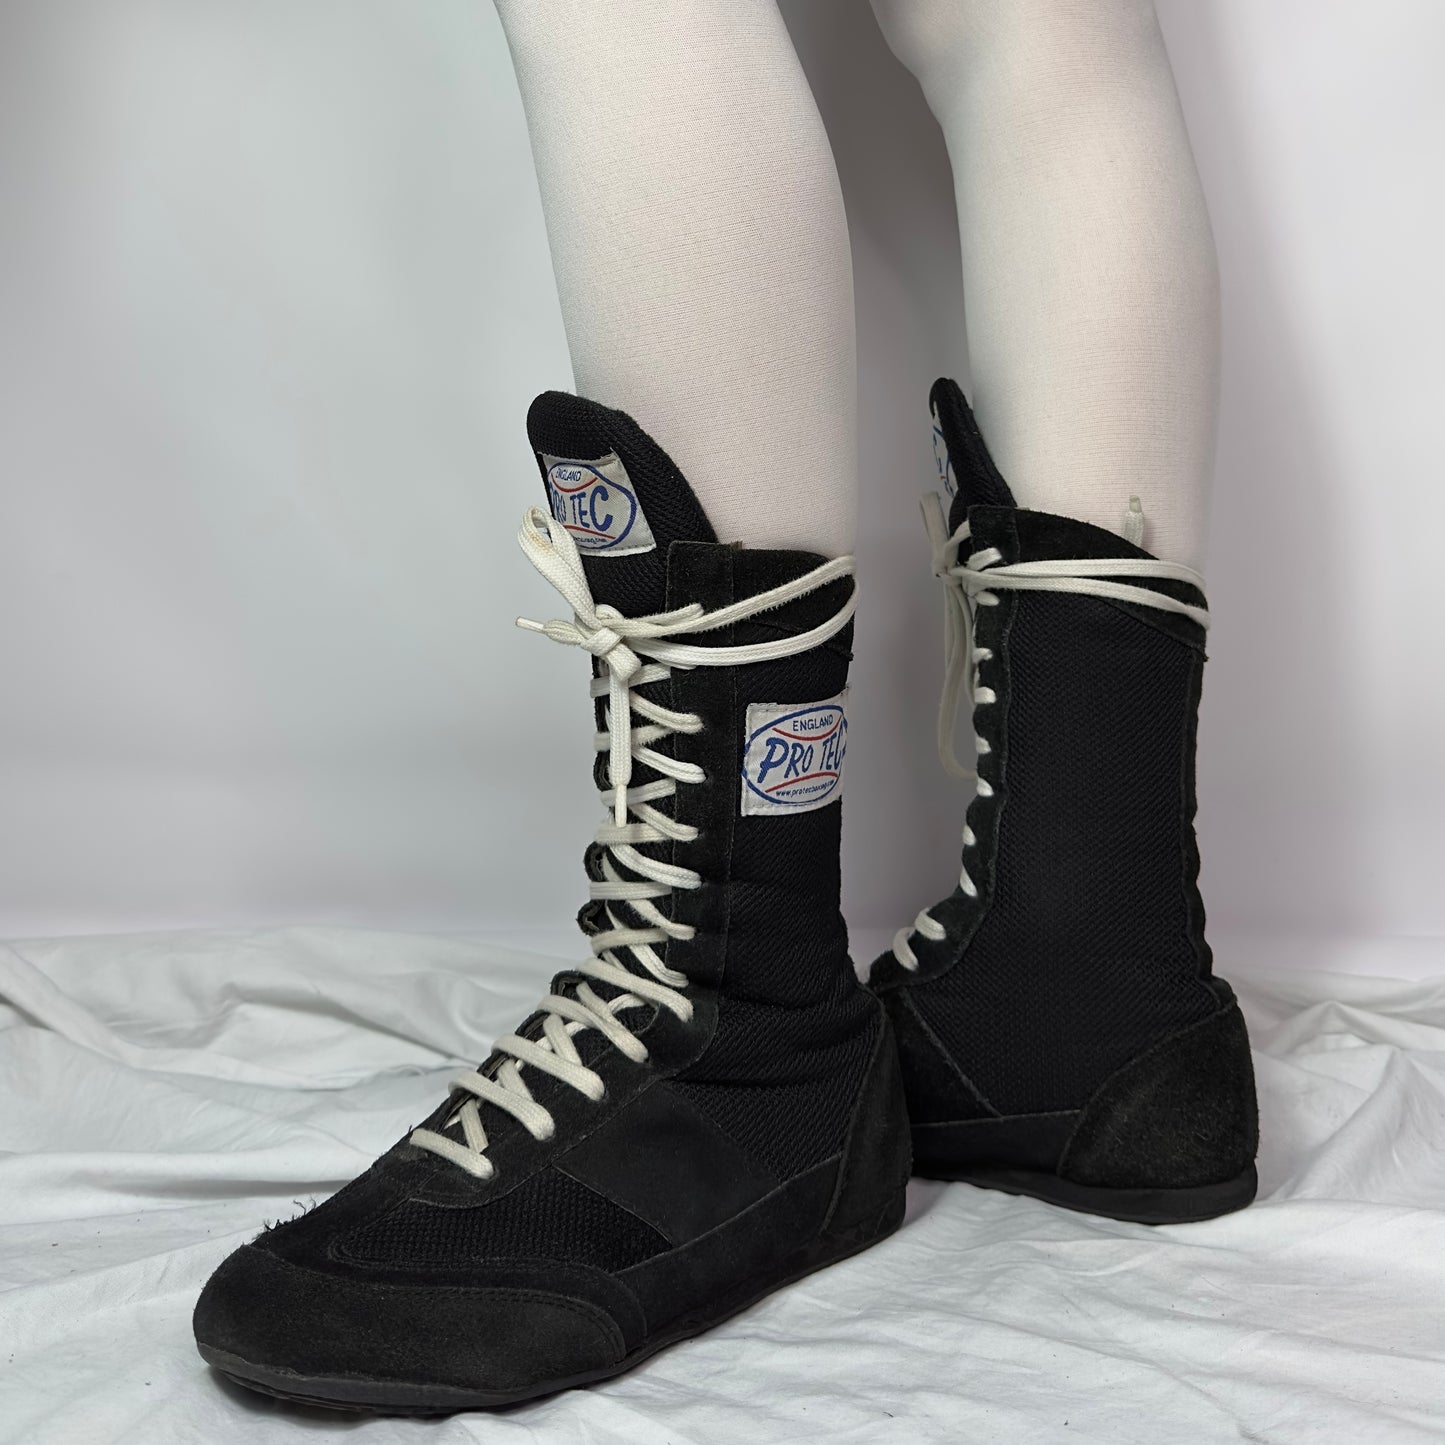 Vintage Boxing Wrestling lace up boots